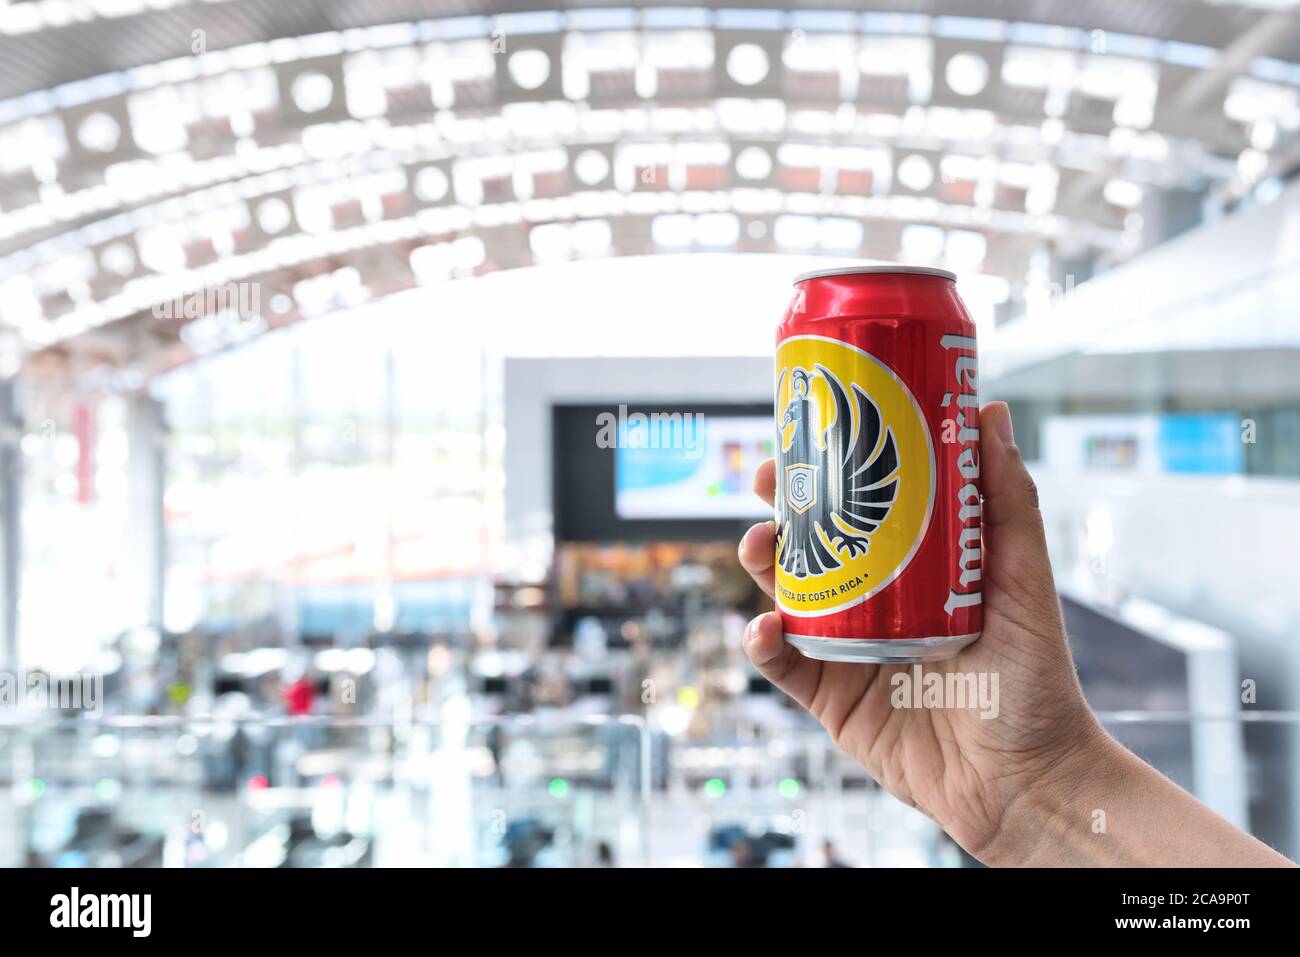 Hand holding an Imperial beer can, the most common beer brand of Costa Rica. Defocused interior view of Juan Santamaría International Airport. Stock Photo